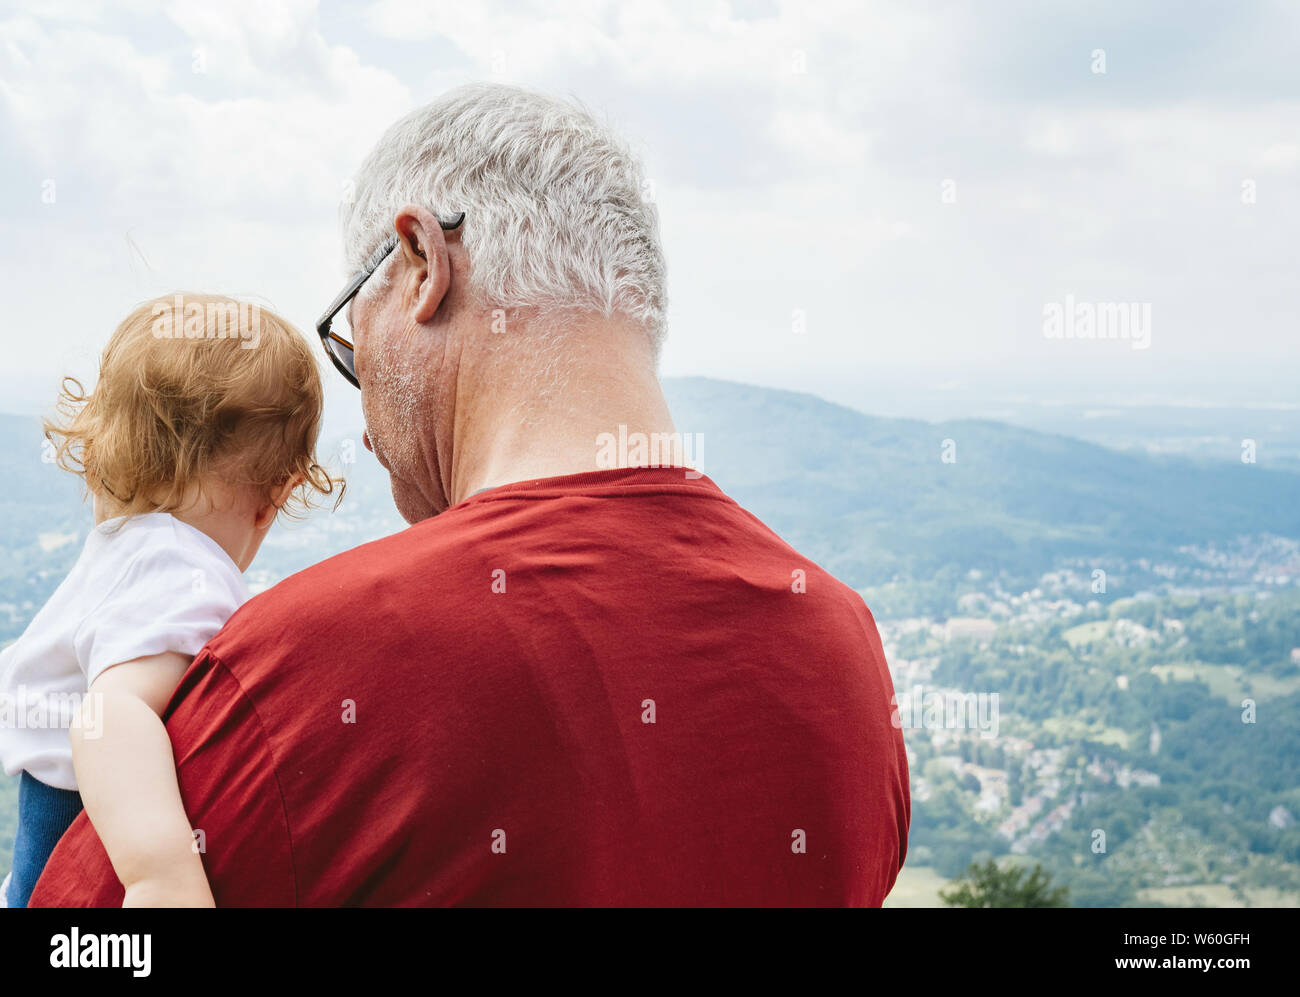 Baden-Baden, Germany - Jul 7, 2019: Rear view of senior male grandfather with white hair holding little child Stock Photo